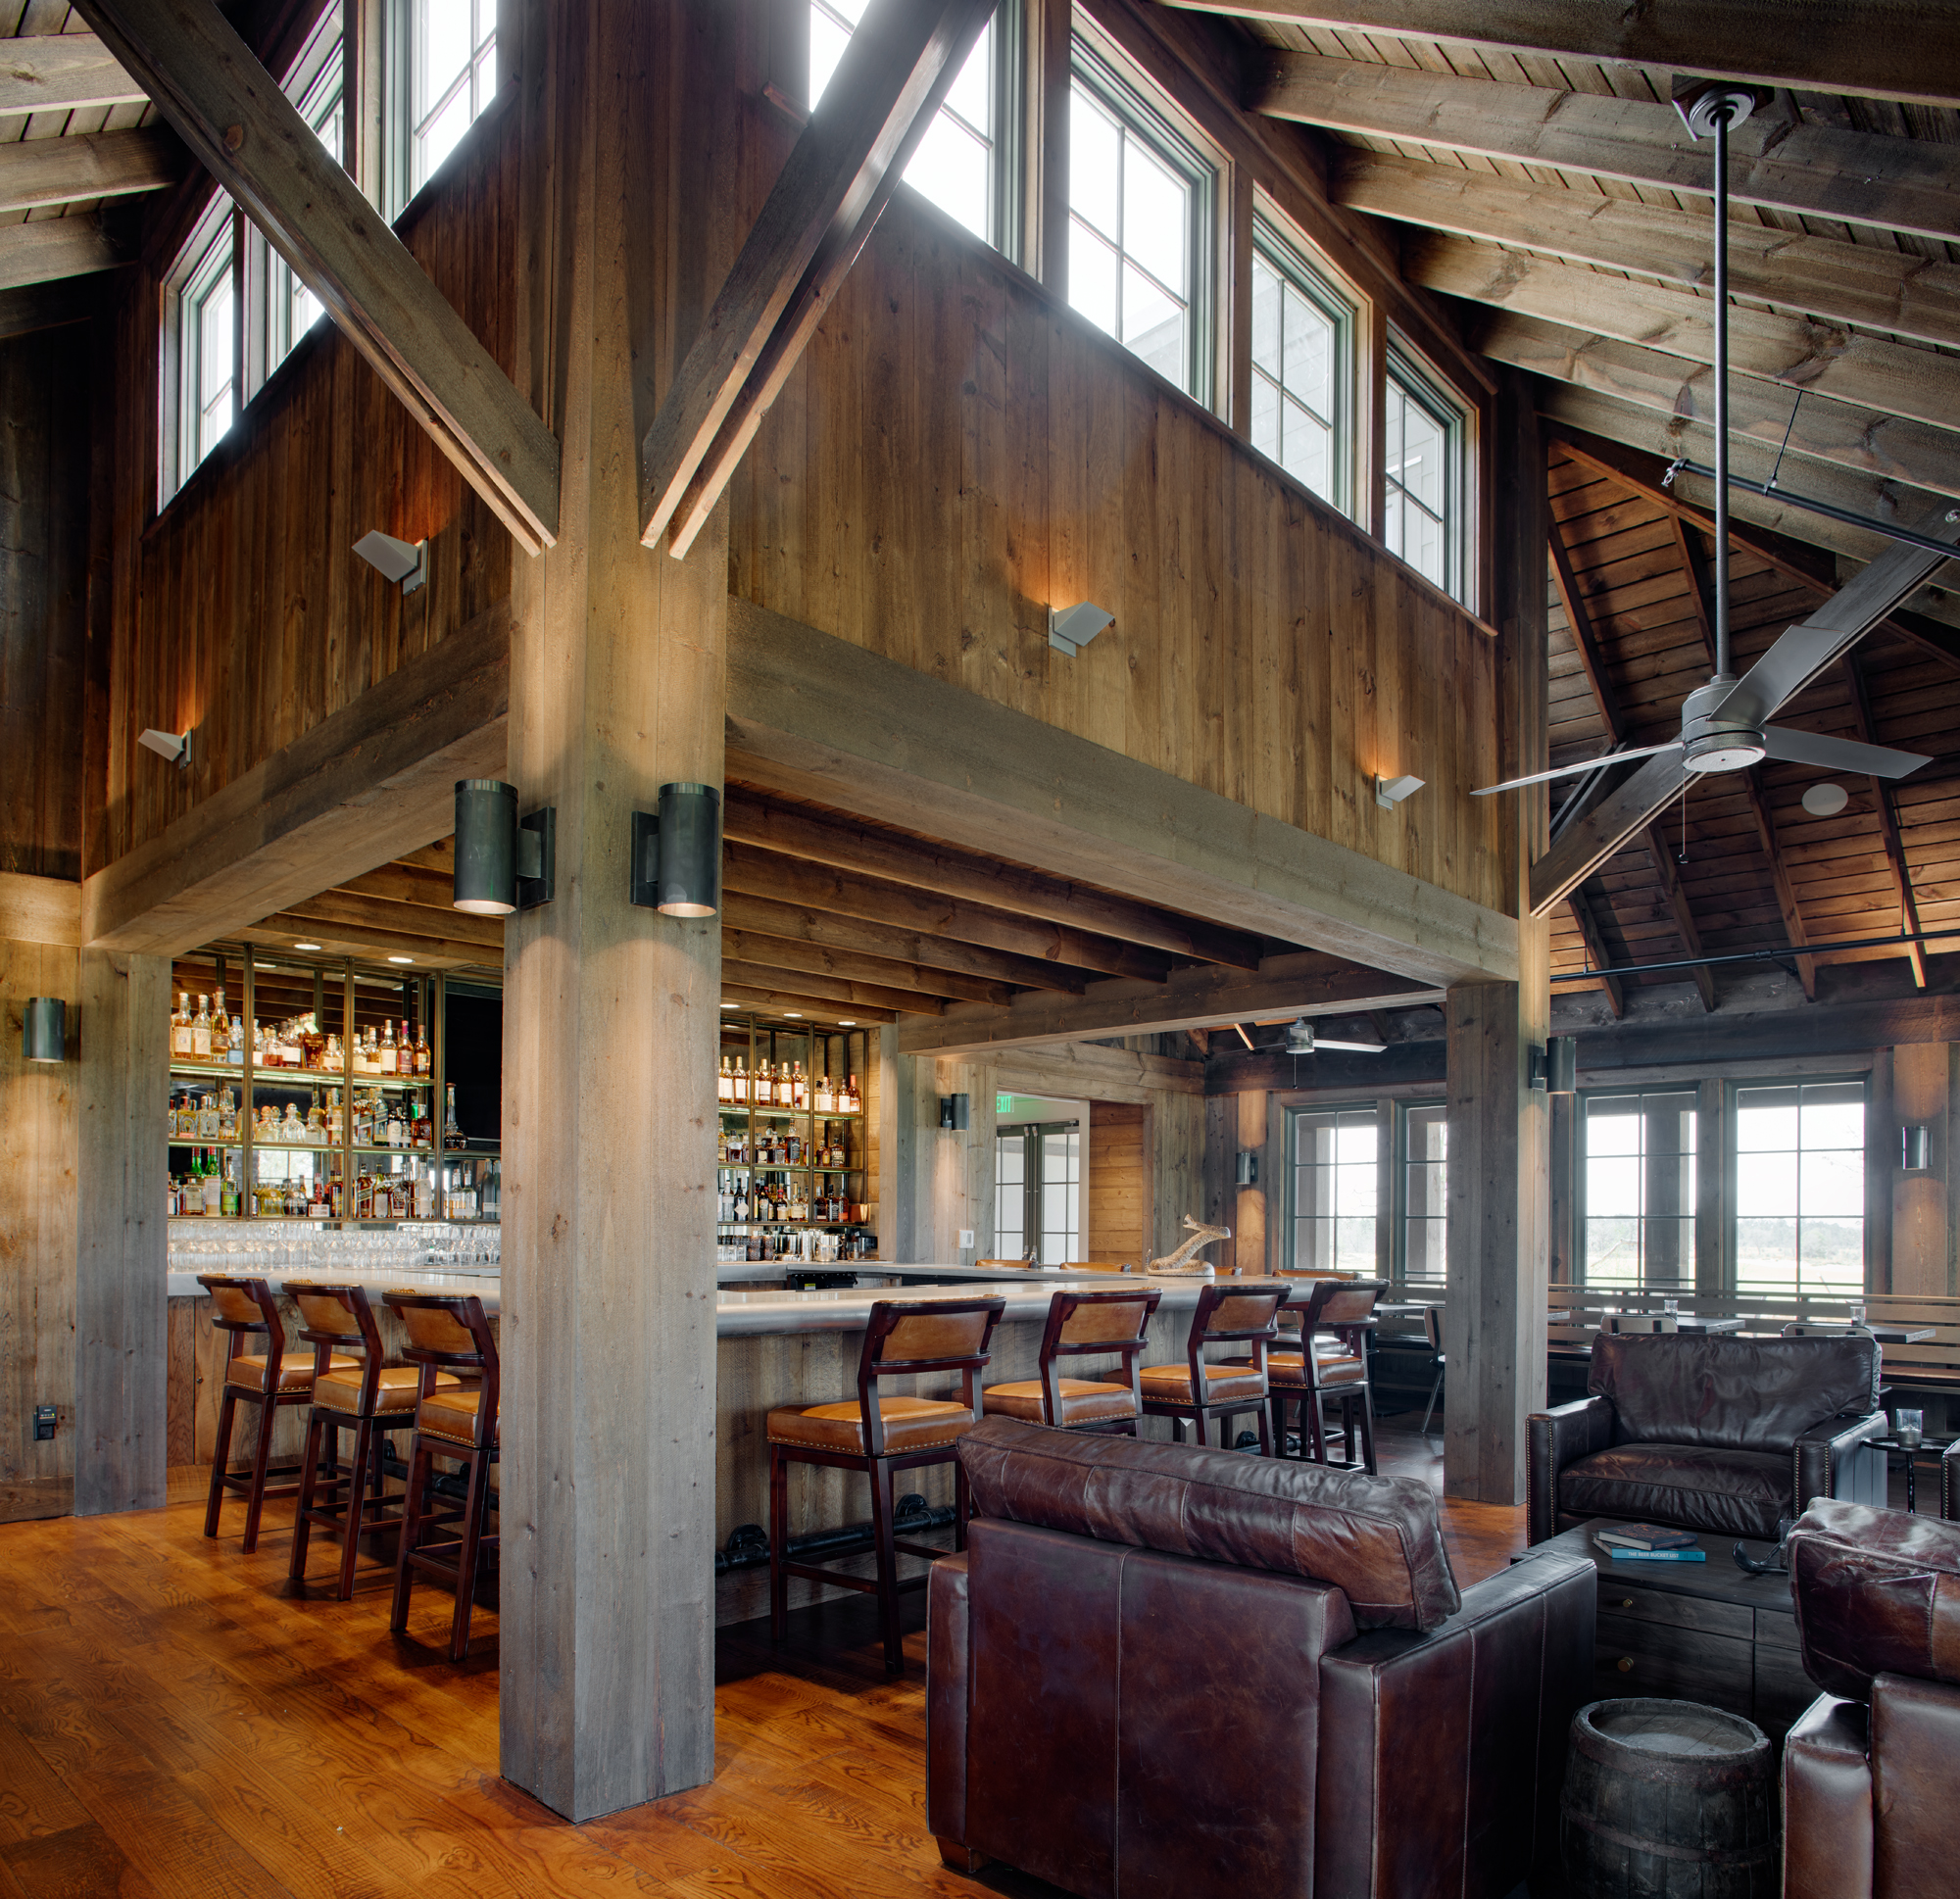 The rustic bar and gathering area at the Ohooppee Match Club is clad in reclaimed wood and features a masculine esthetic, design by J. Banks Design Group